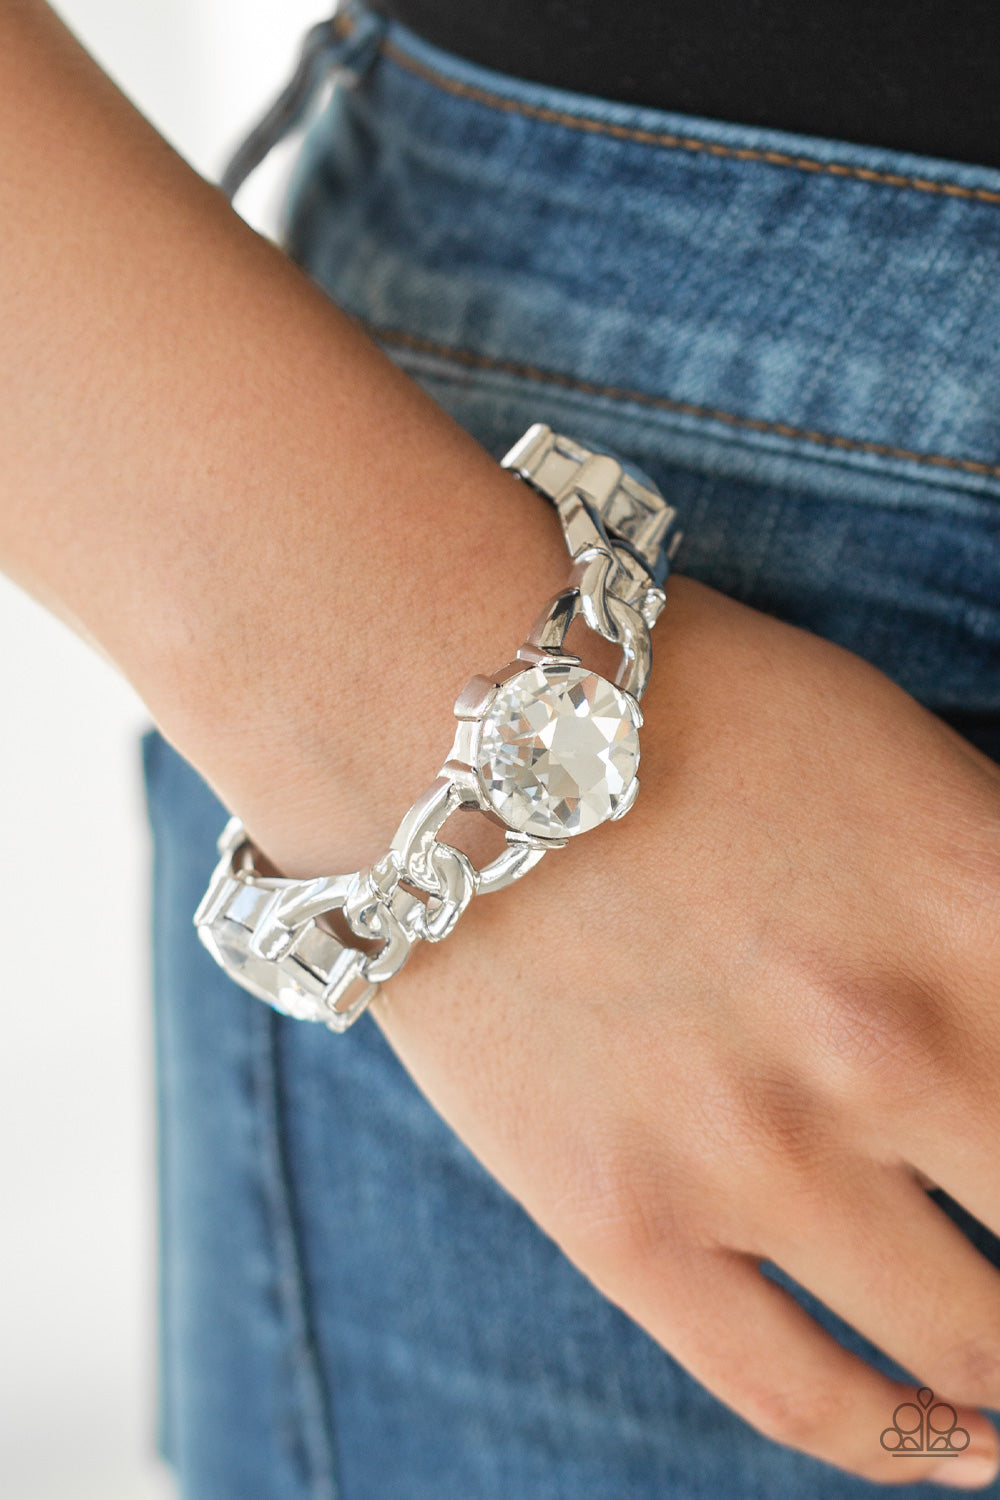 Light Up The Room - White Gem and Silver Bracelet - Paparazzi Accessories - All That Sparkles XOXO